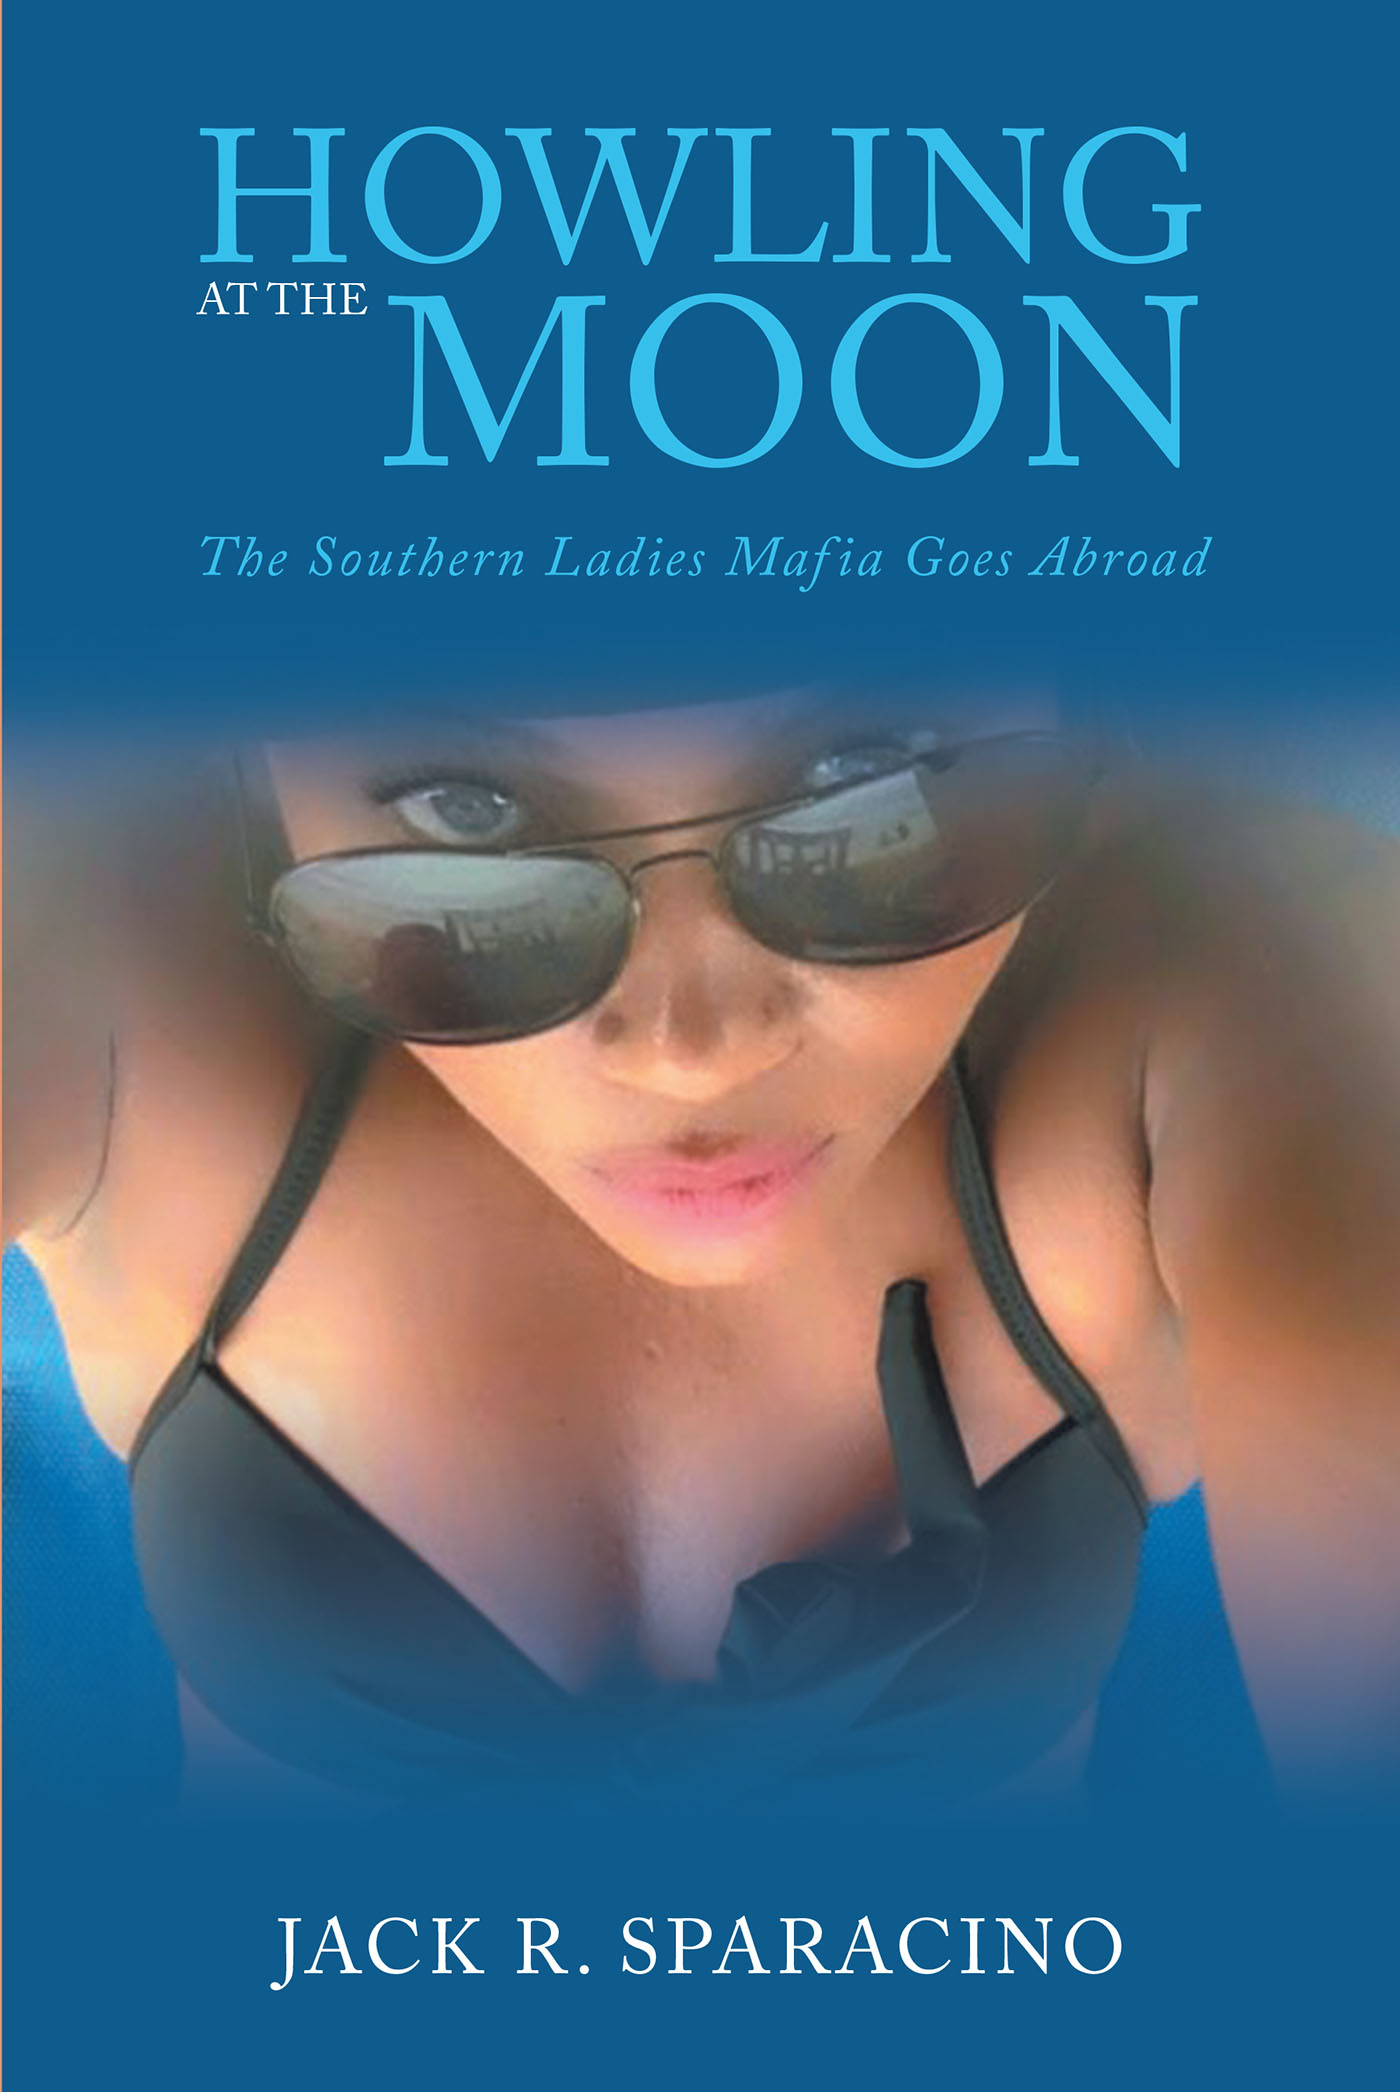 Jack R. Sparacino’s New Book, "Howling at the Moon: The Southern Ladies Mafia Goes Abroad," Follows a Group of Friends and Their Zany, Out-of-This-World Vacation